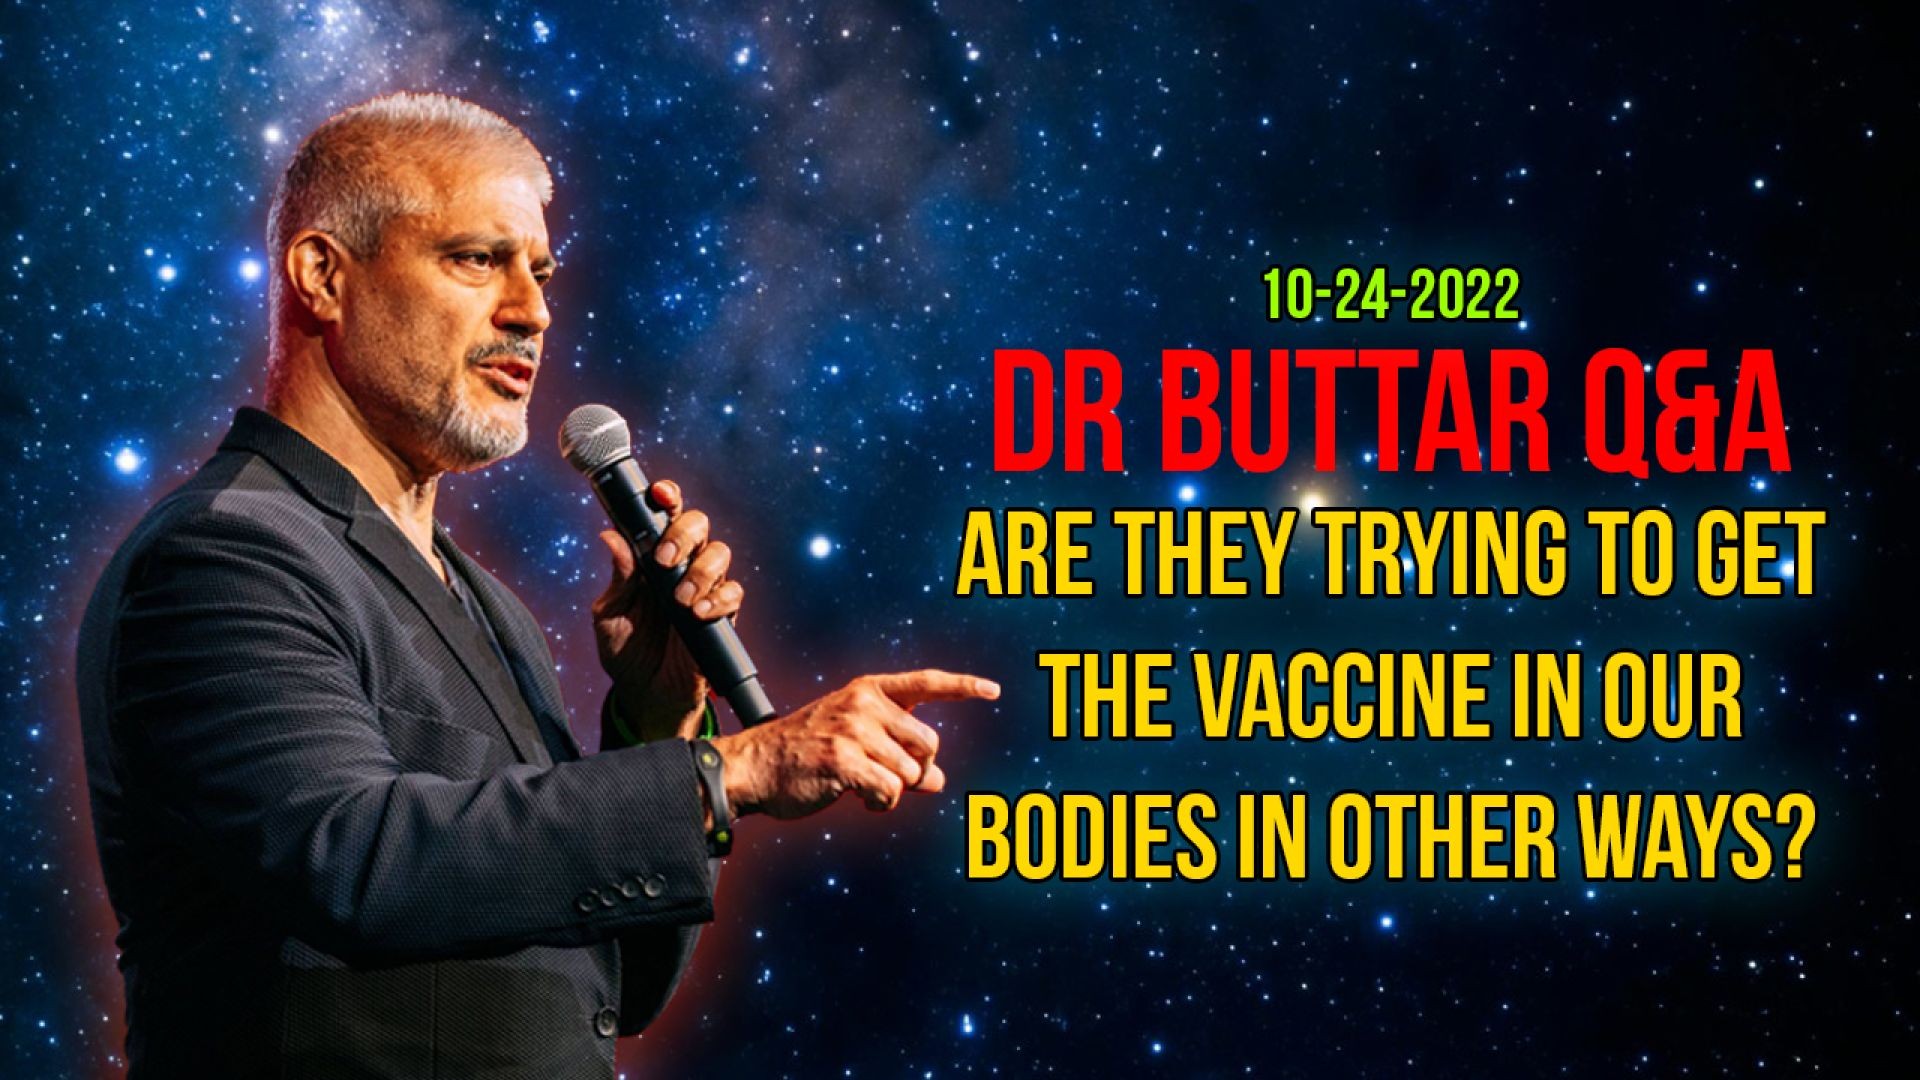 10-24-2022 Q&A - Are They Trying To The Get Vaccine In Our Bodies in Other Ways?